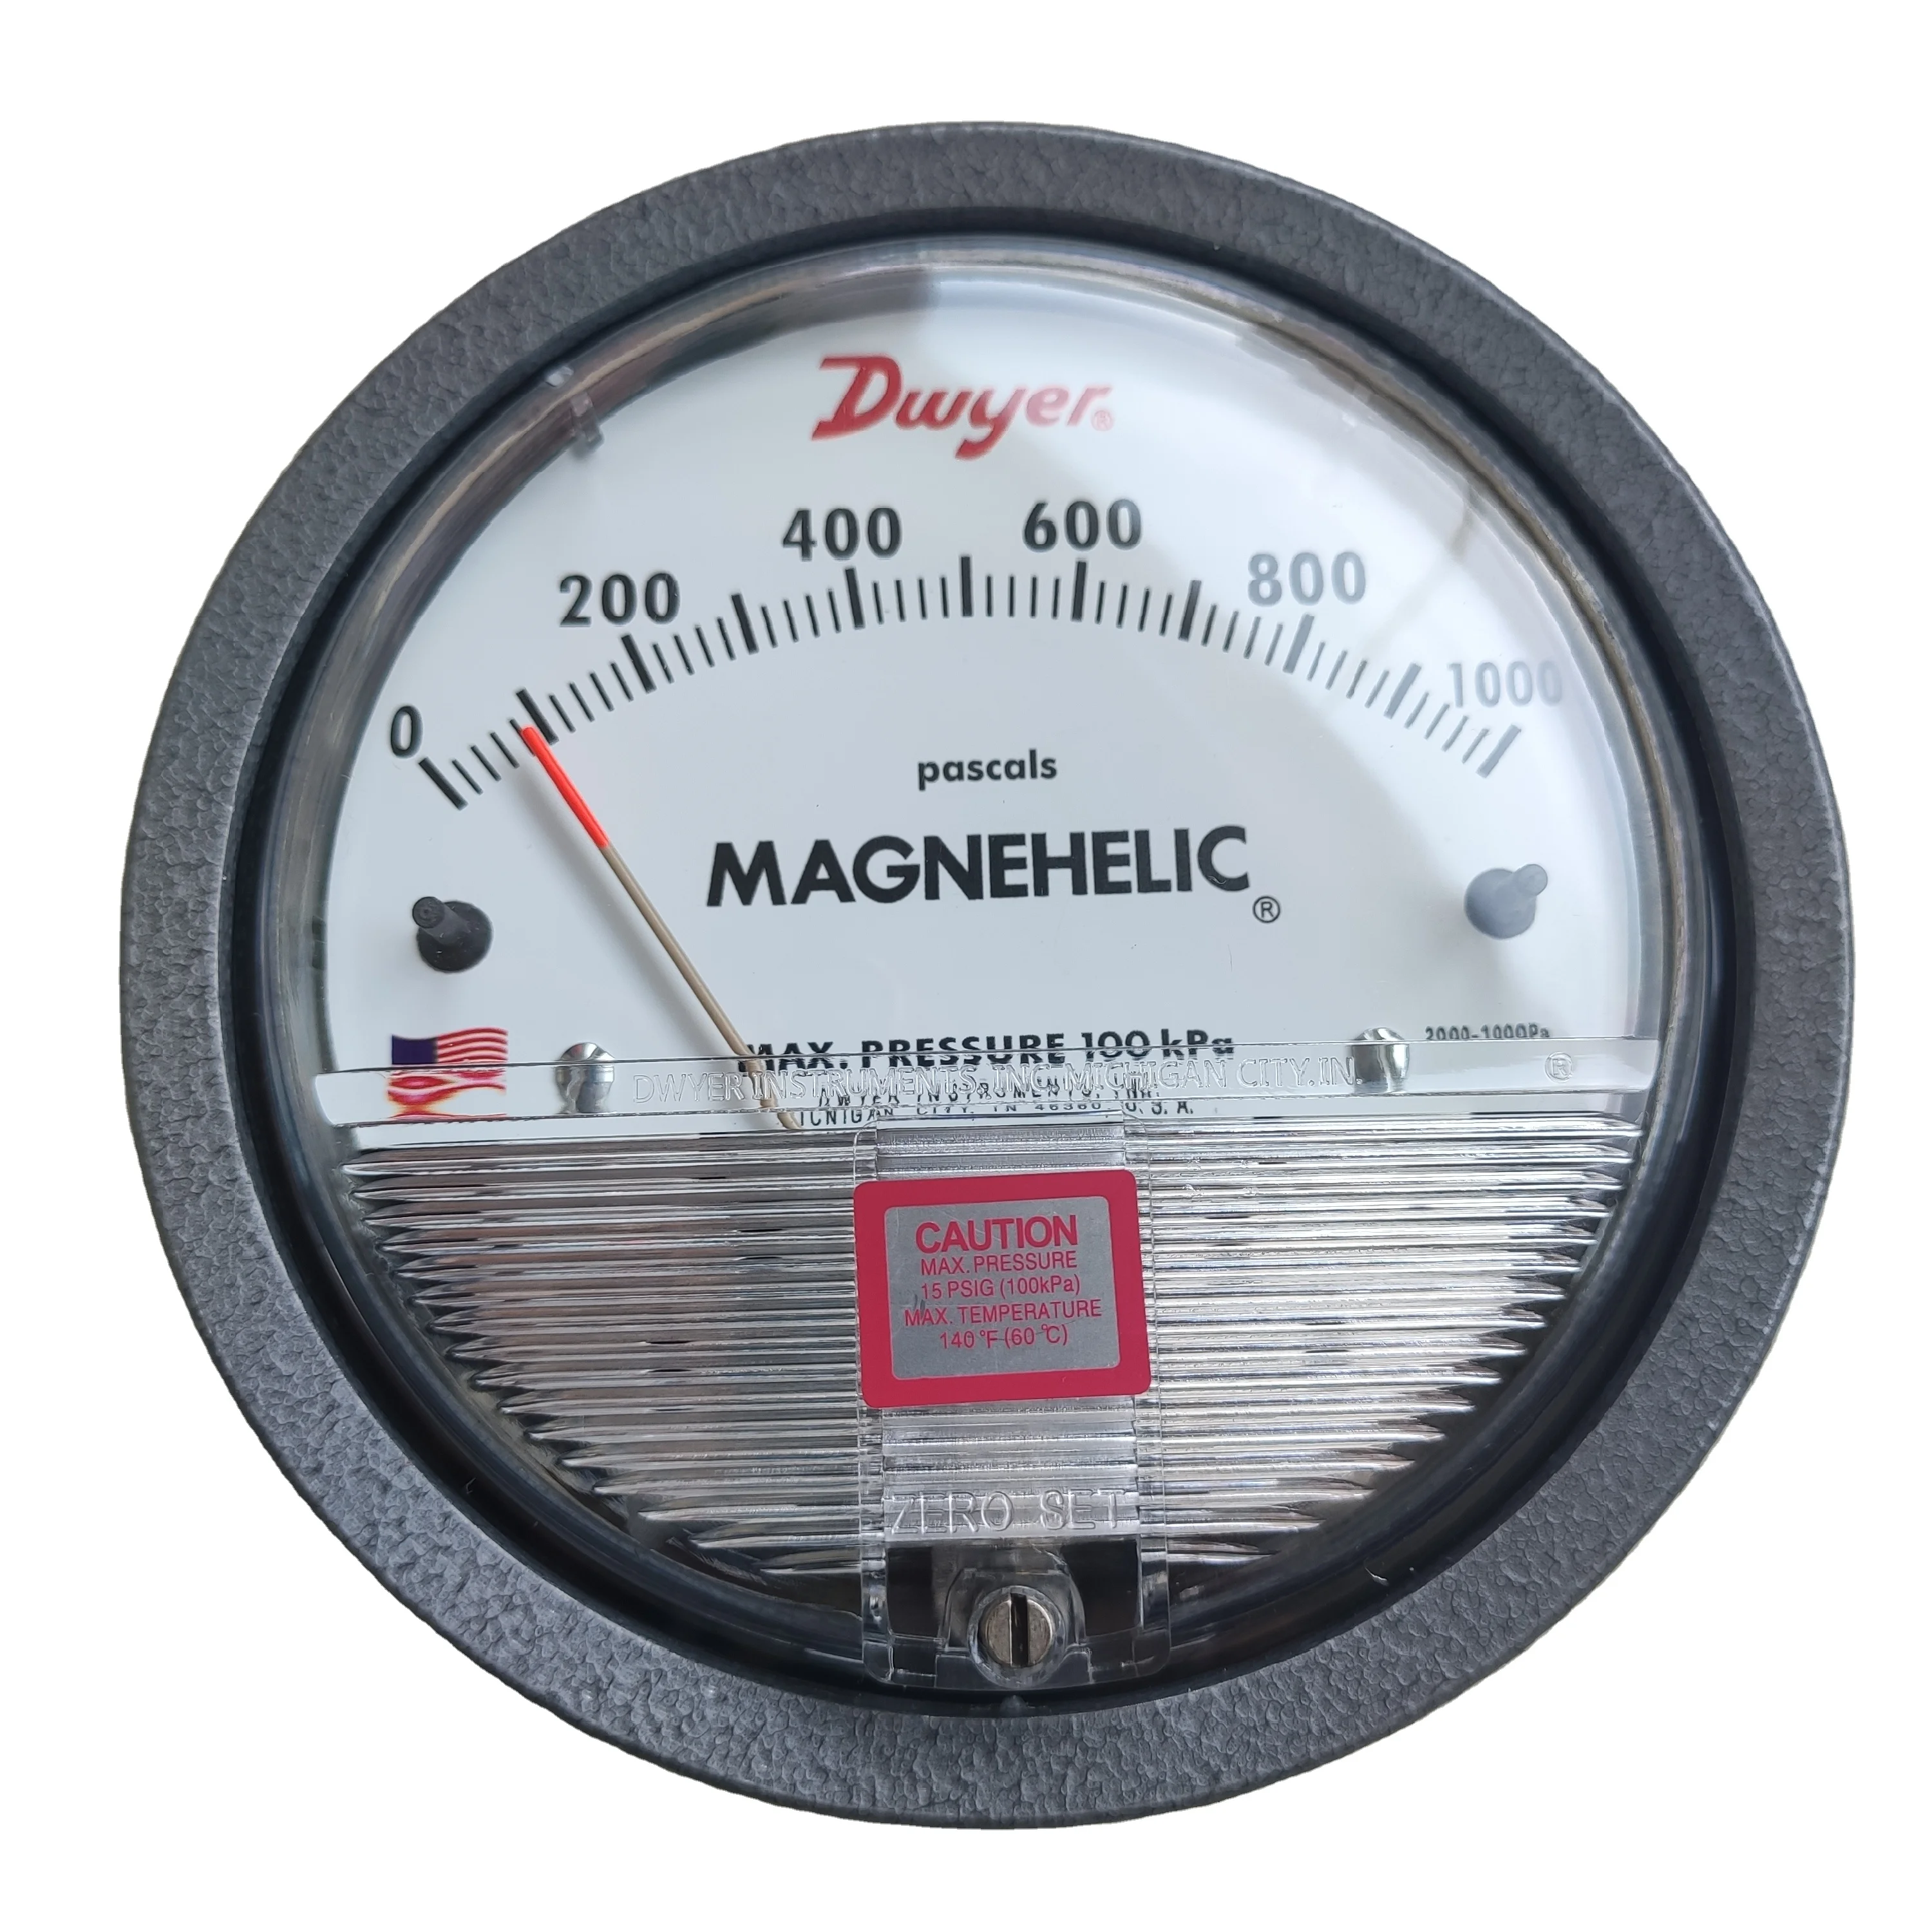 Original Dwyer Magrfhelic Differential Pressure Gauge 100mm Series 2000 -  Buy Dwyer 2000 Pressure Gauge,1000mm Pressure Gauge,Dwyer Magrfhelic  Differential Pressure Gauge Product on Alibaba.com